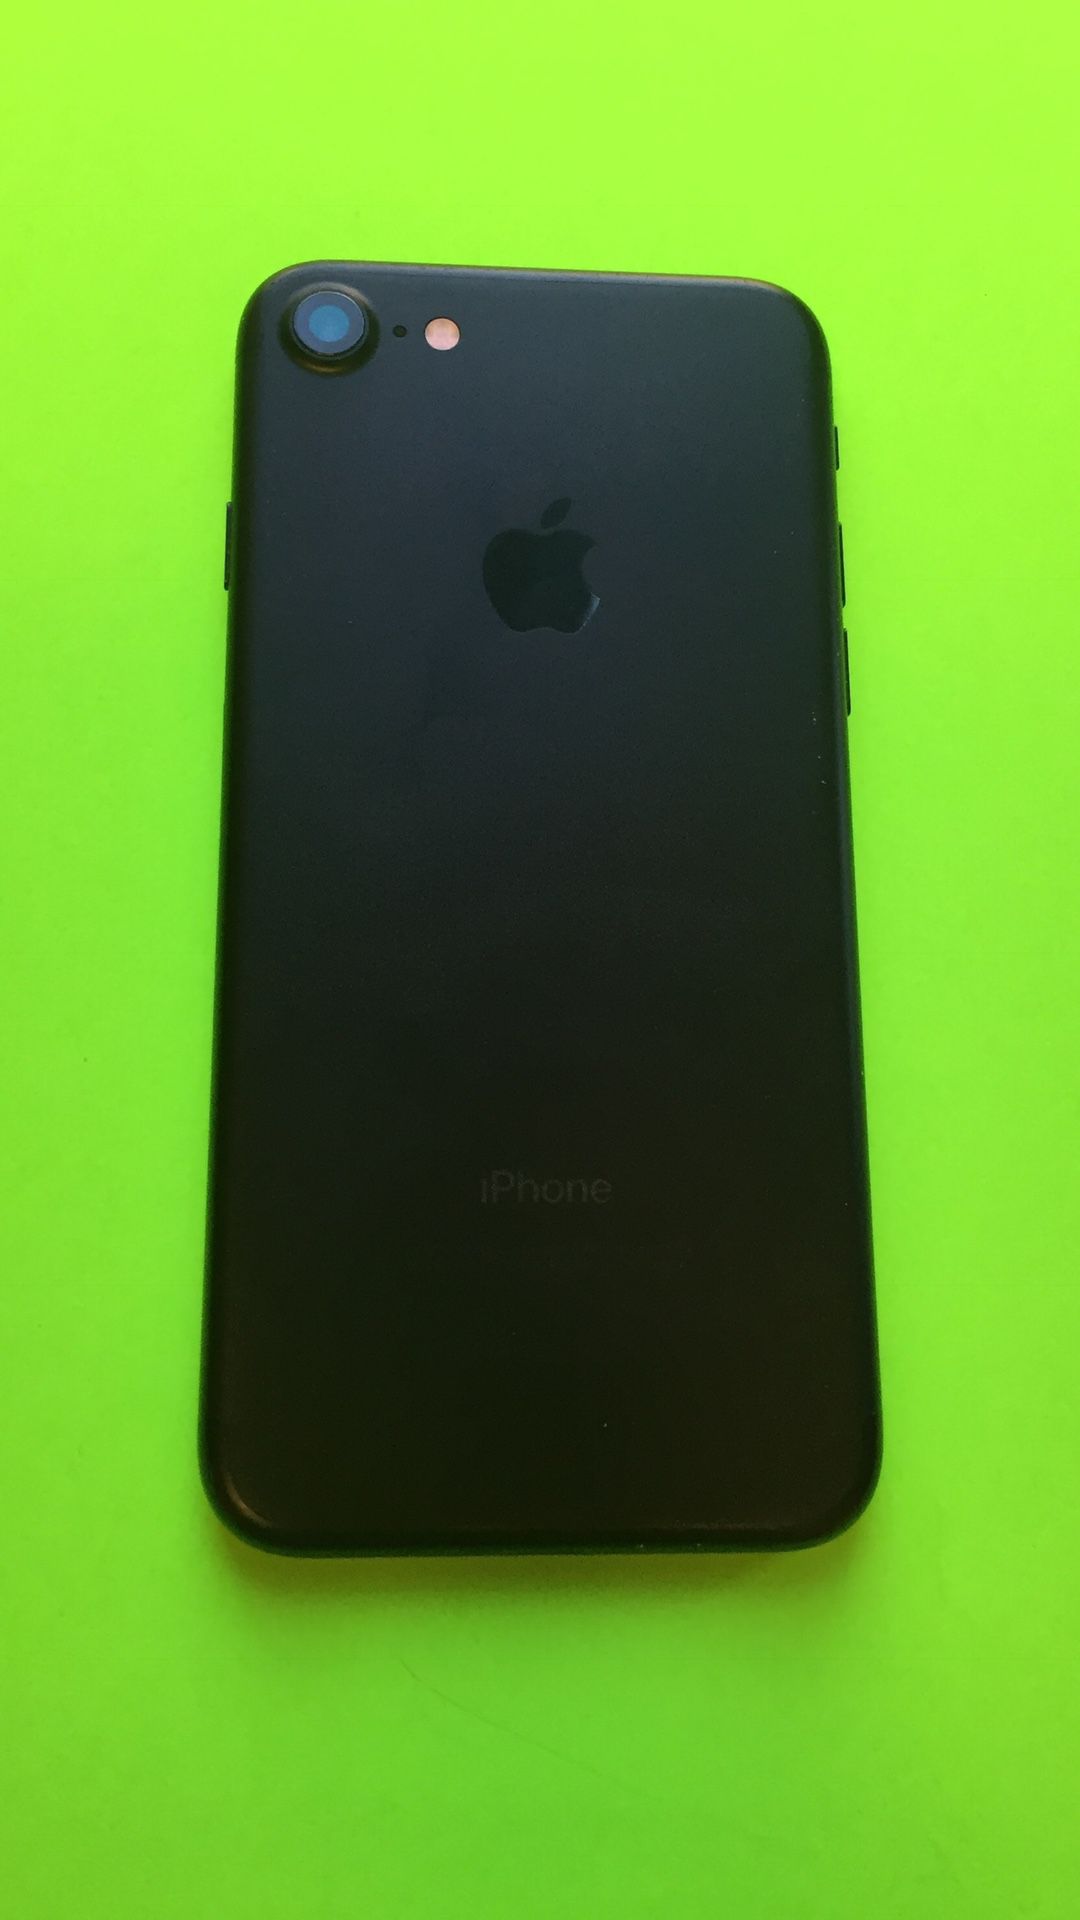 Factory Unlocked Iphone 7 32GB. Excellent Condition.